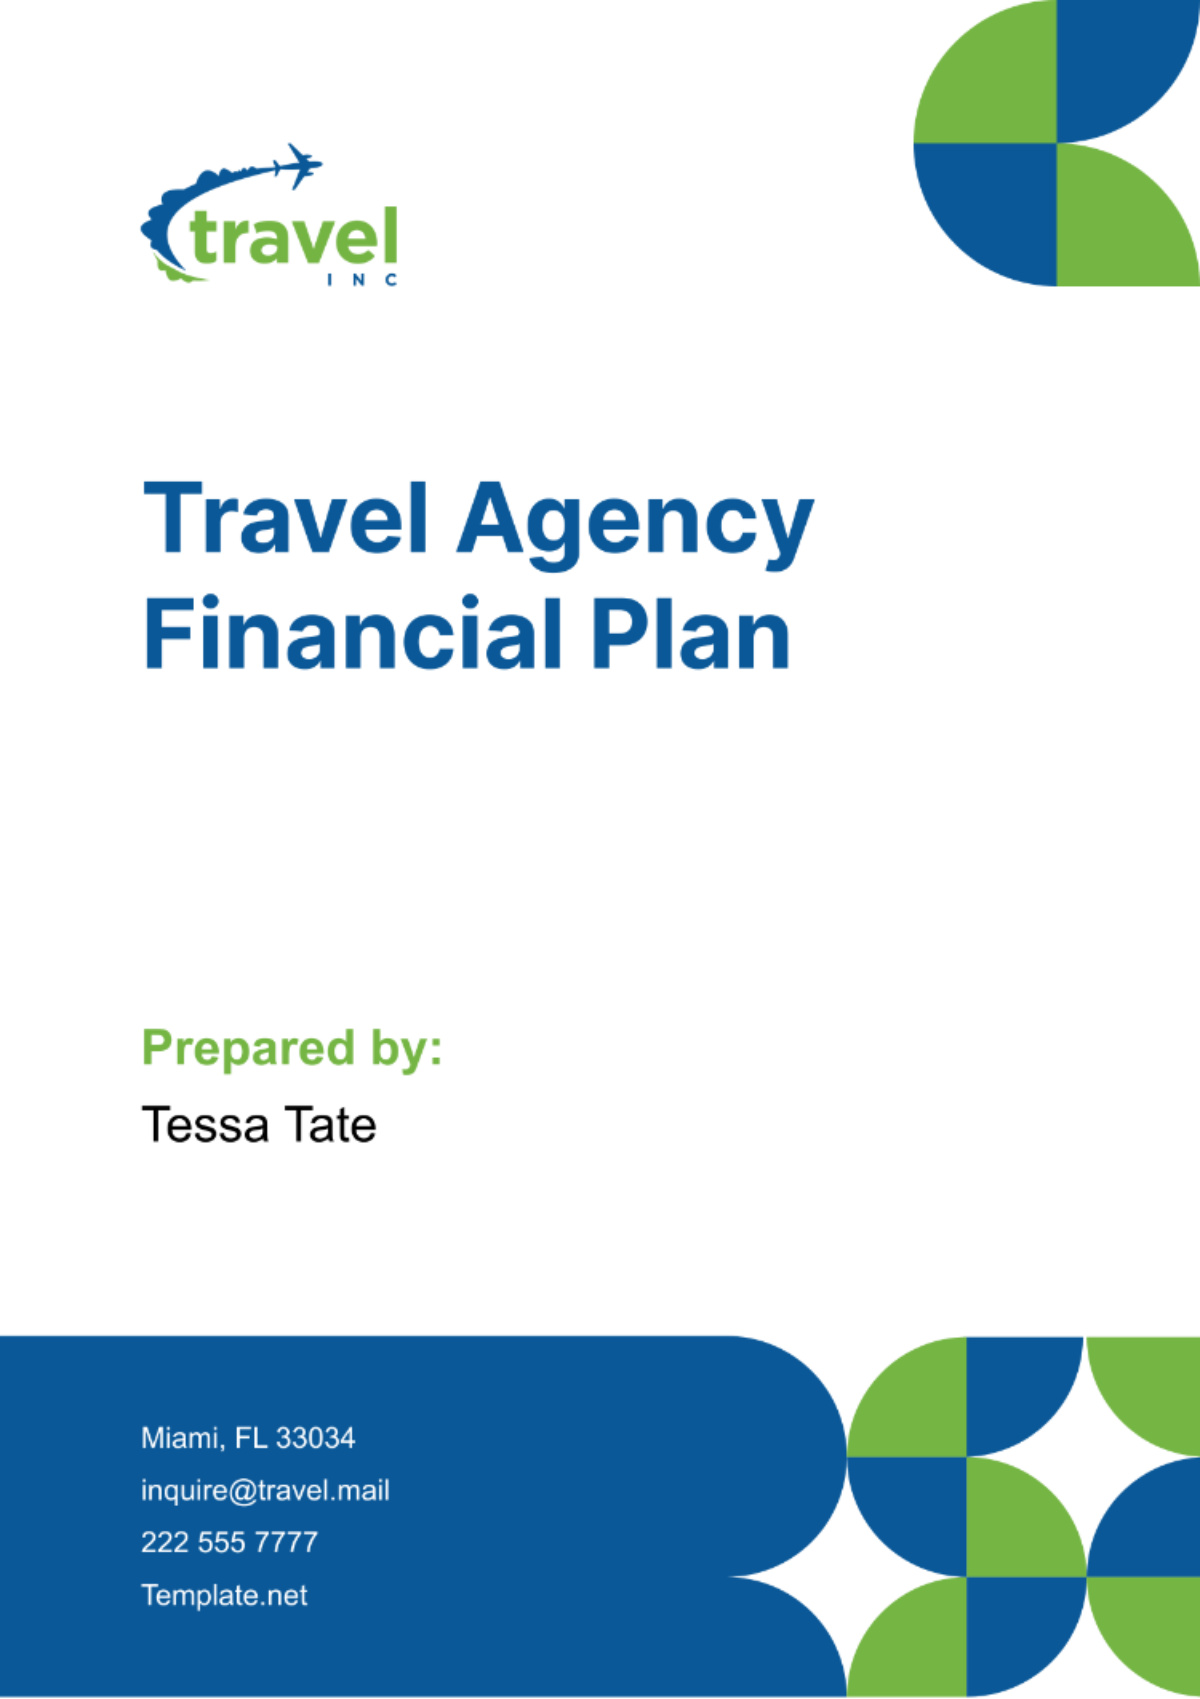 Travel Agency Financial Plan Template